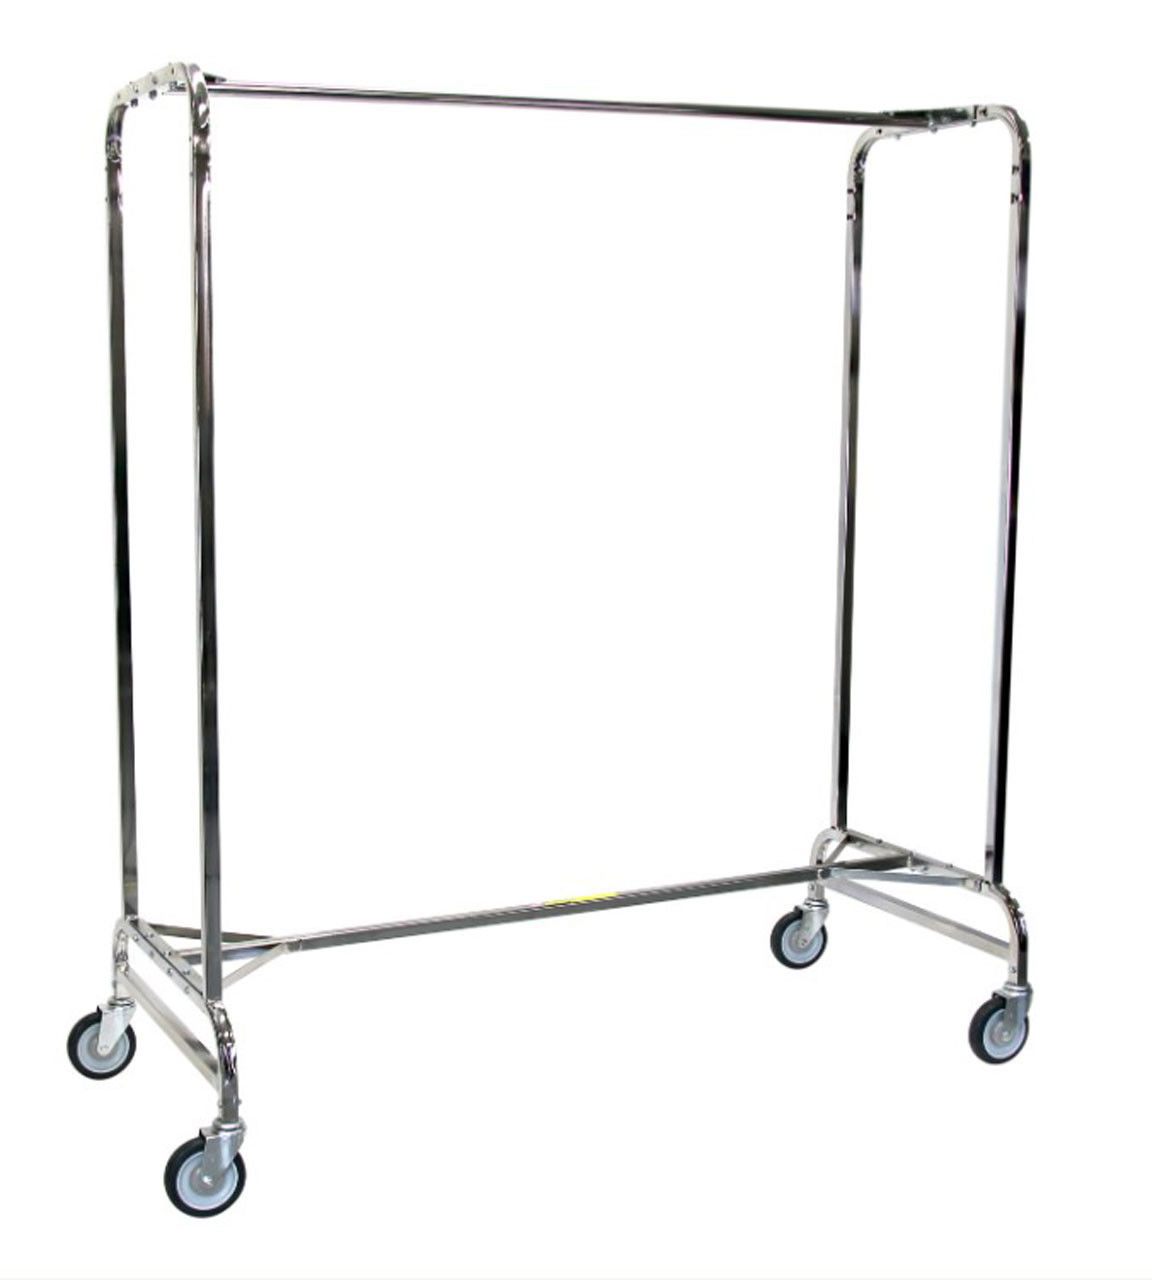 How is this heavy duty garment rack designed?